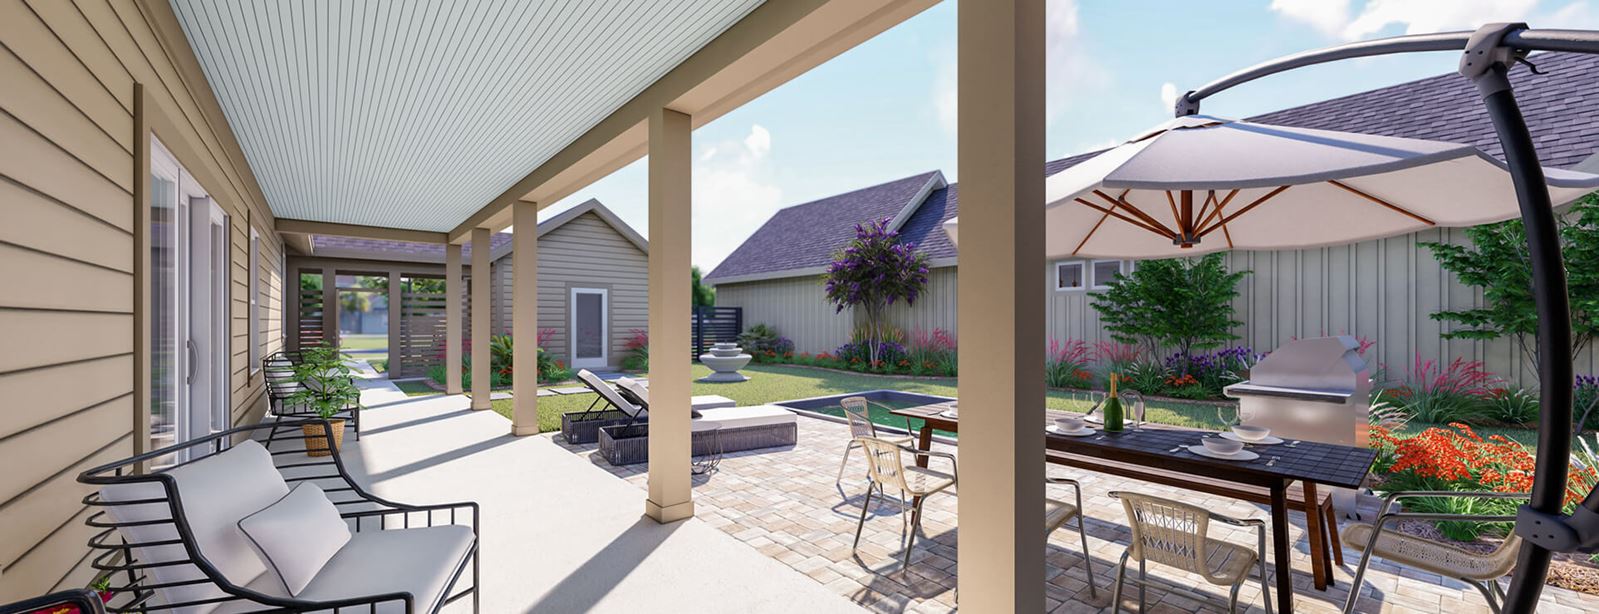 Rendering of New Leaf DOMUS collection homes with courtyards.